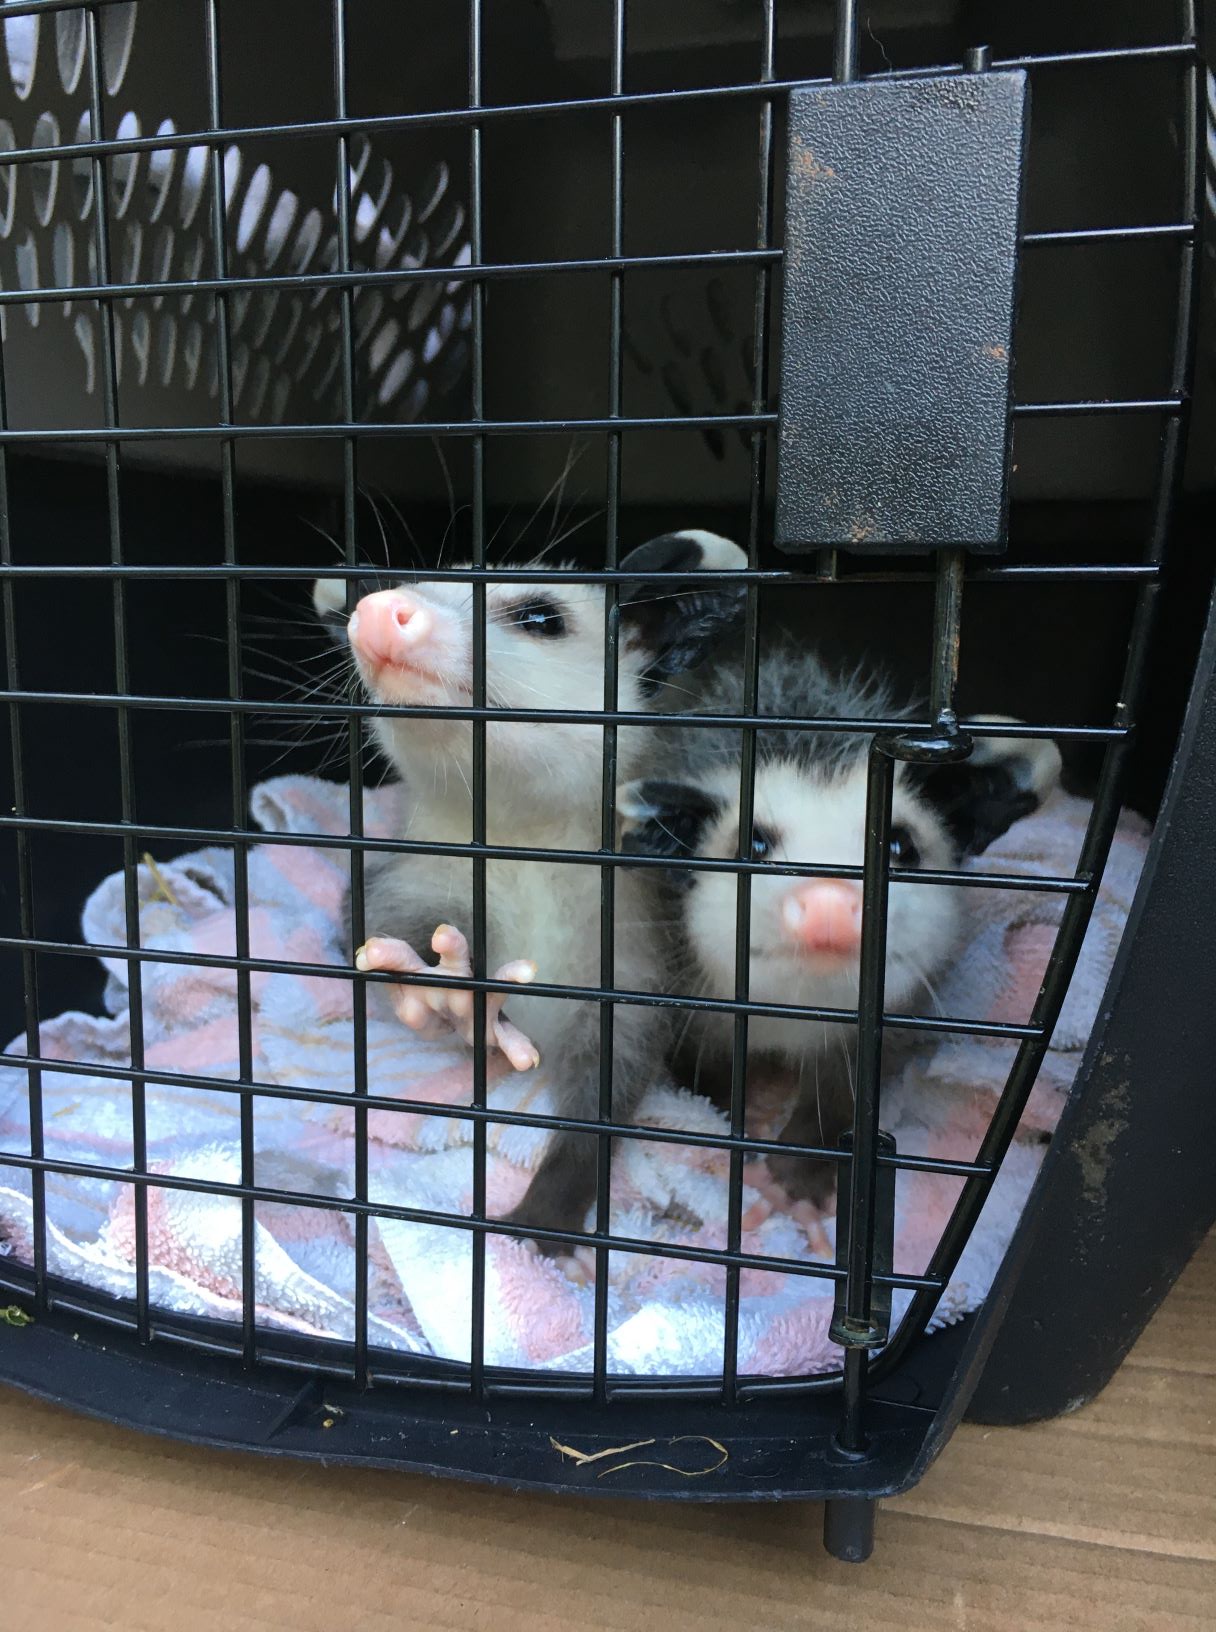 Baby opossums in a crate small